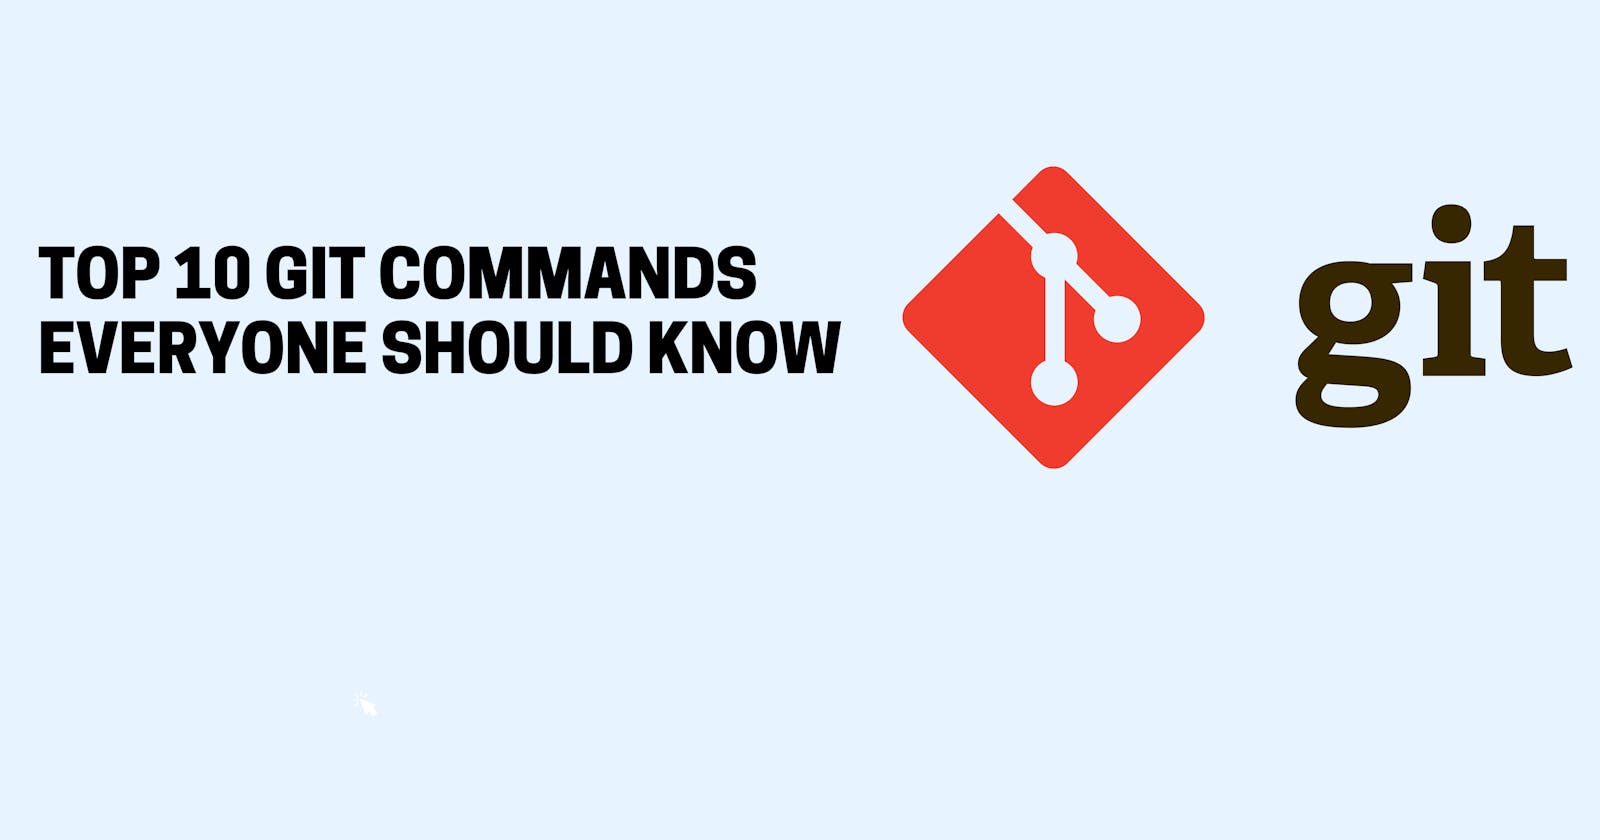 Top 10 Git commands that Everyone Should Know